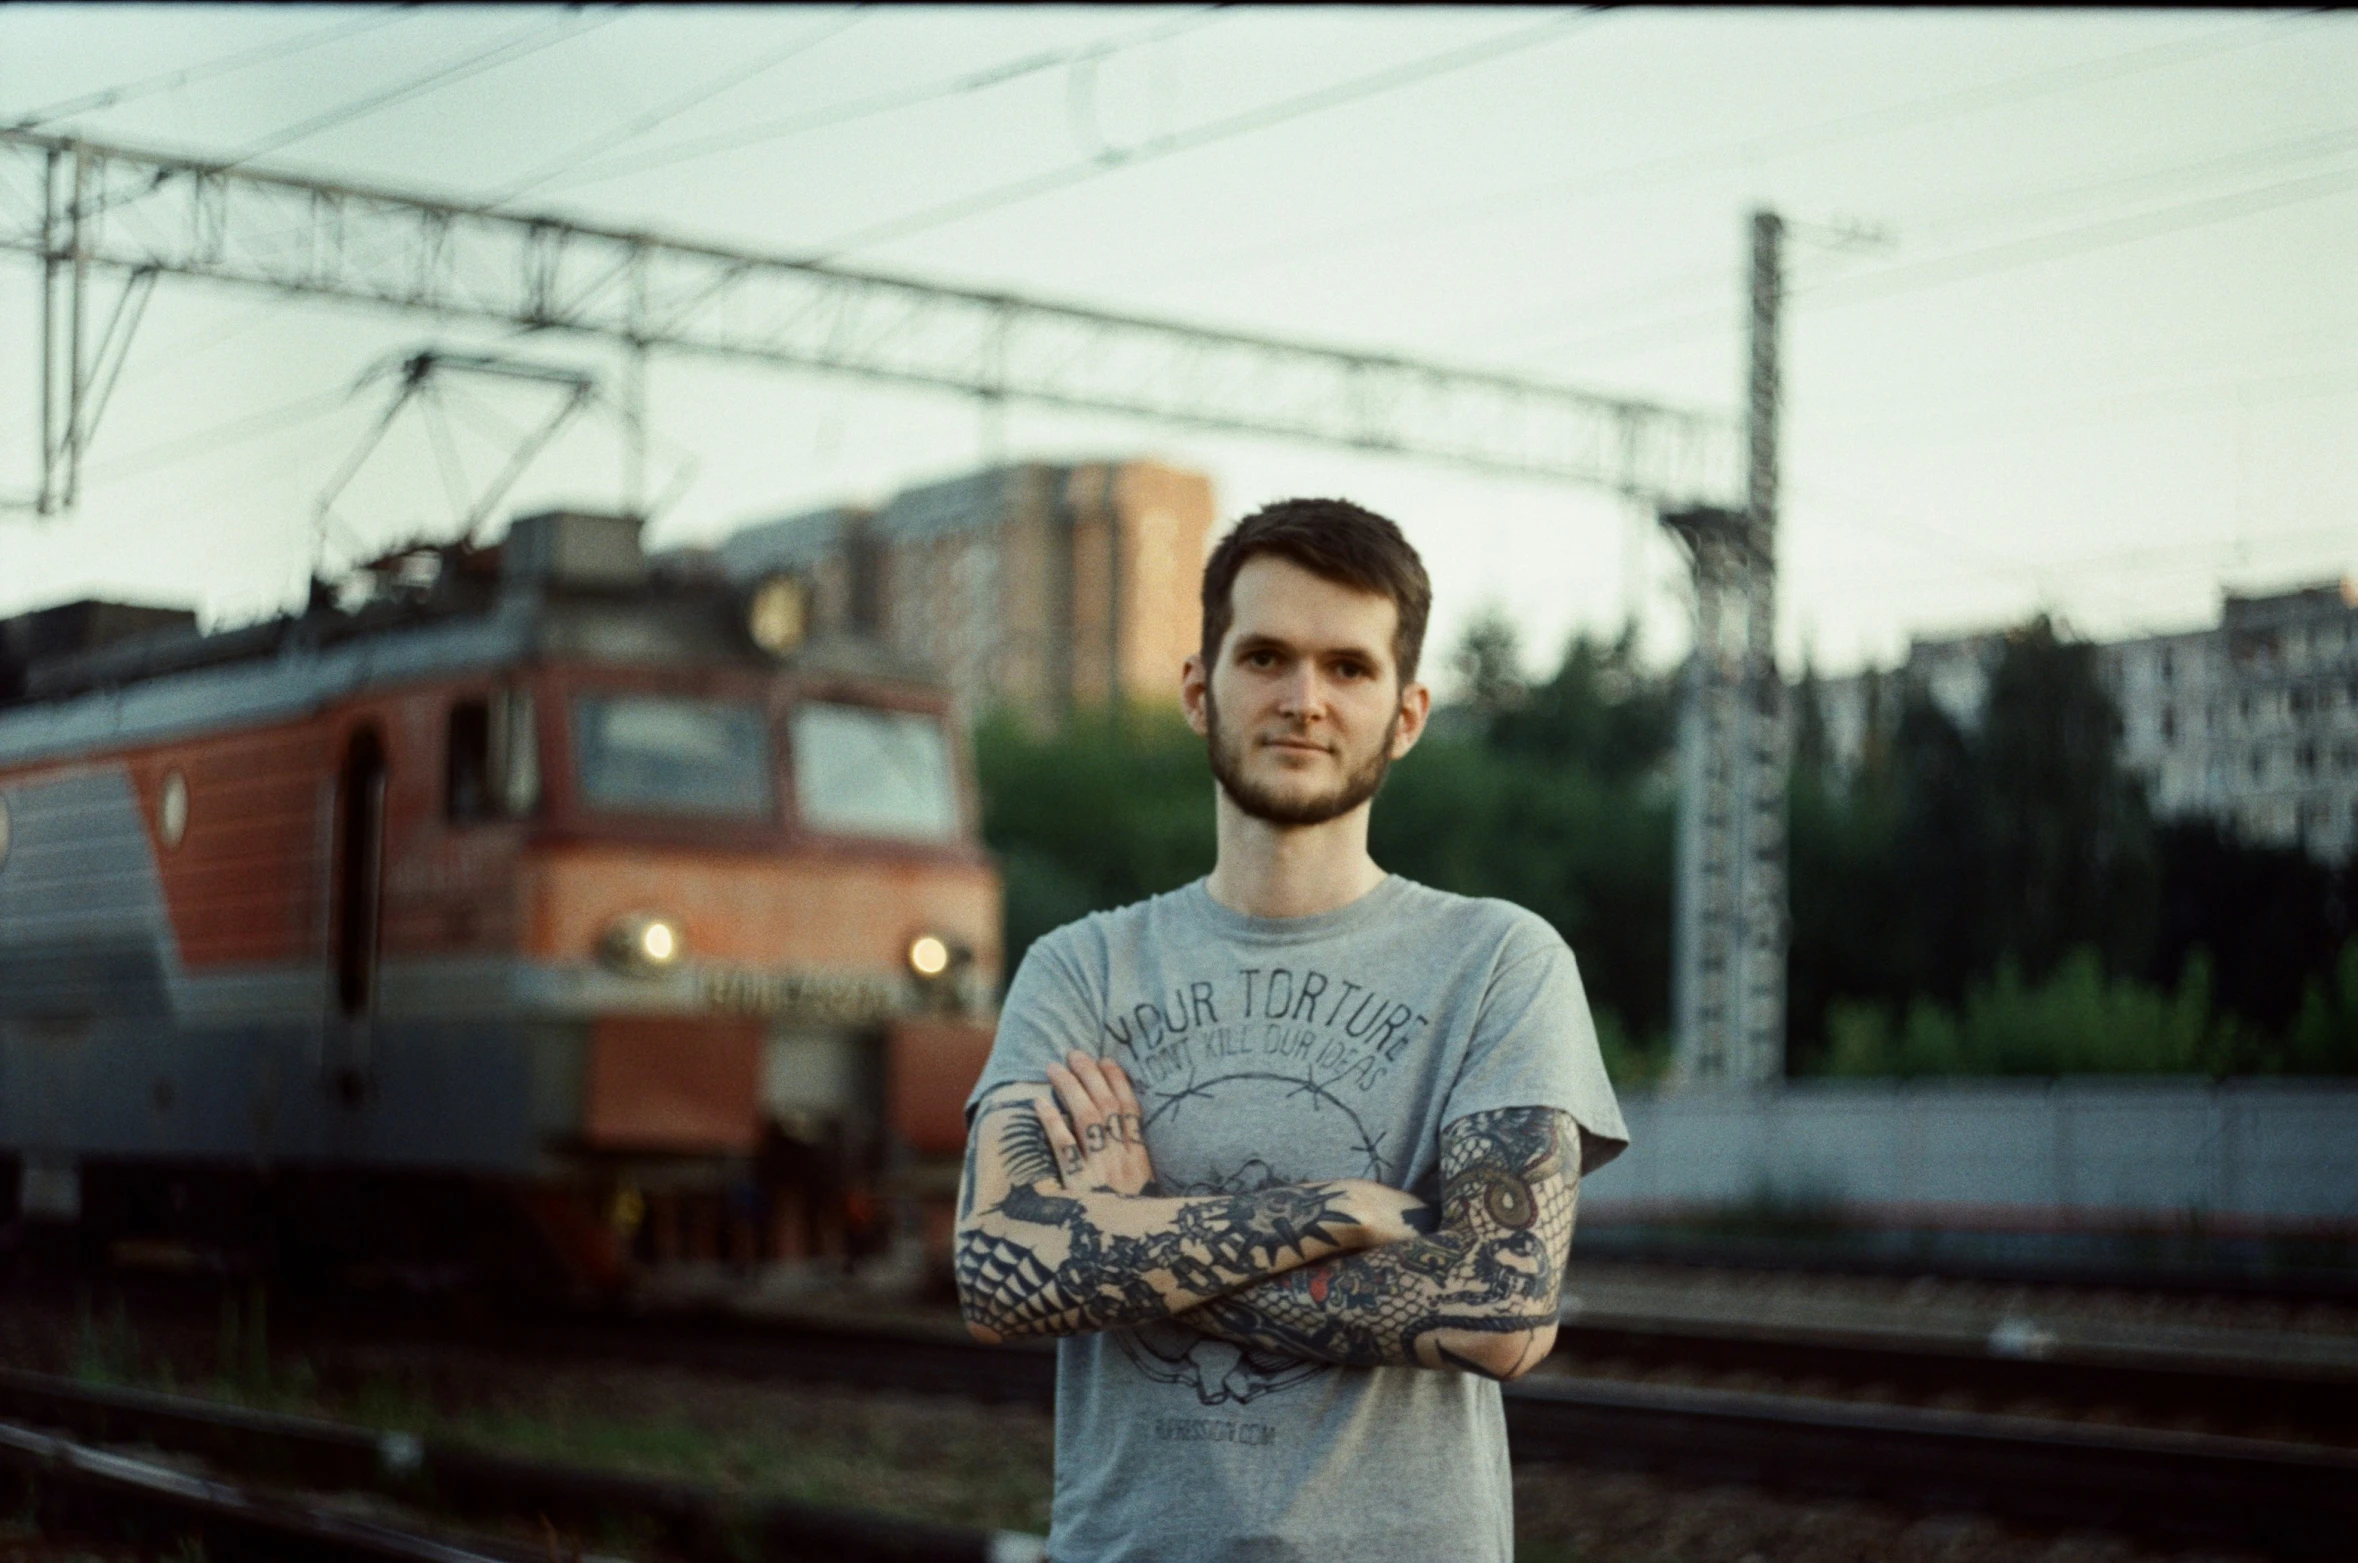 a man with tattoos stands next to a train on the tracks